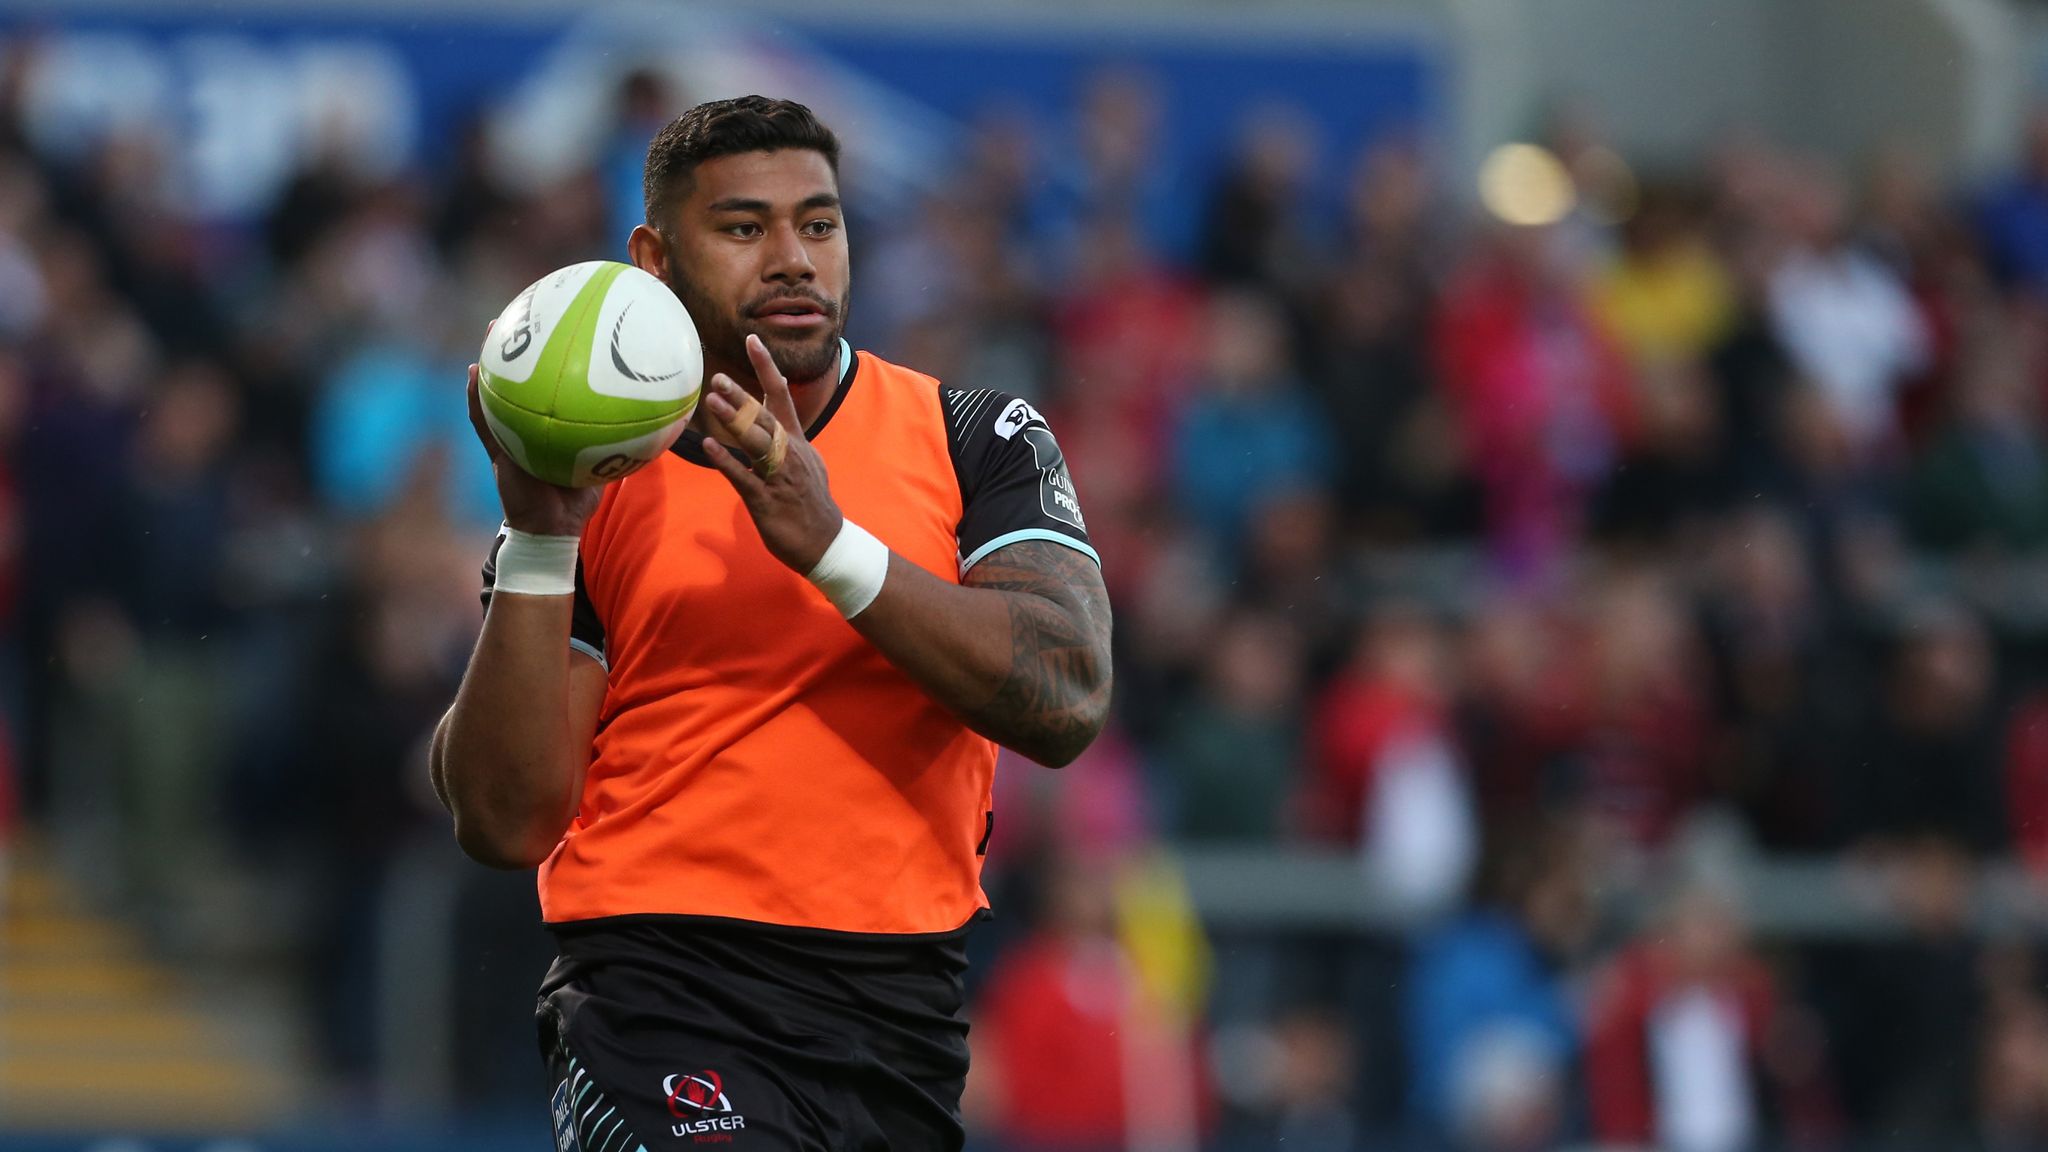 Charles Piutau Club over country was an easy decision to make Rugby Union News Sky Sports